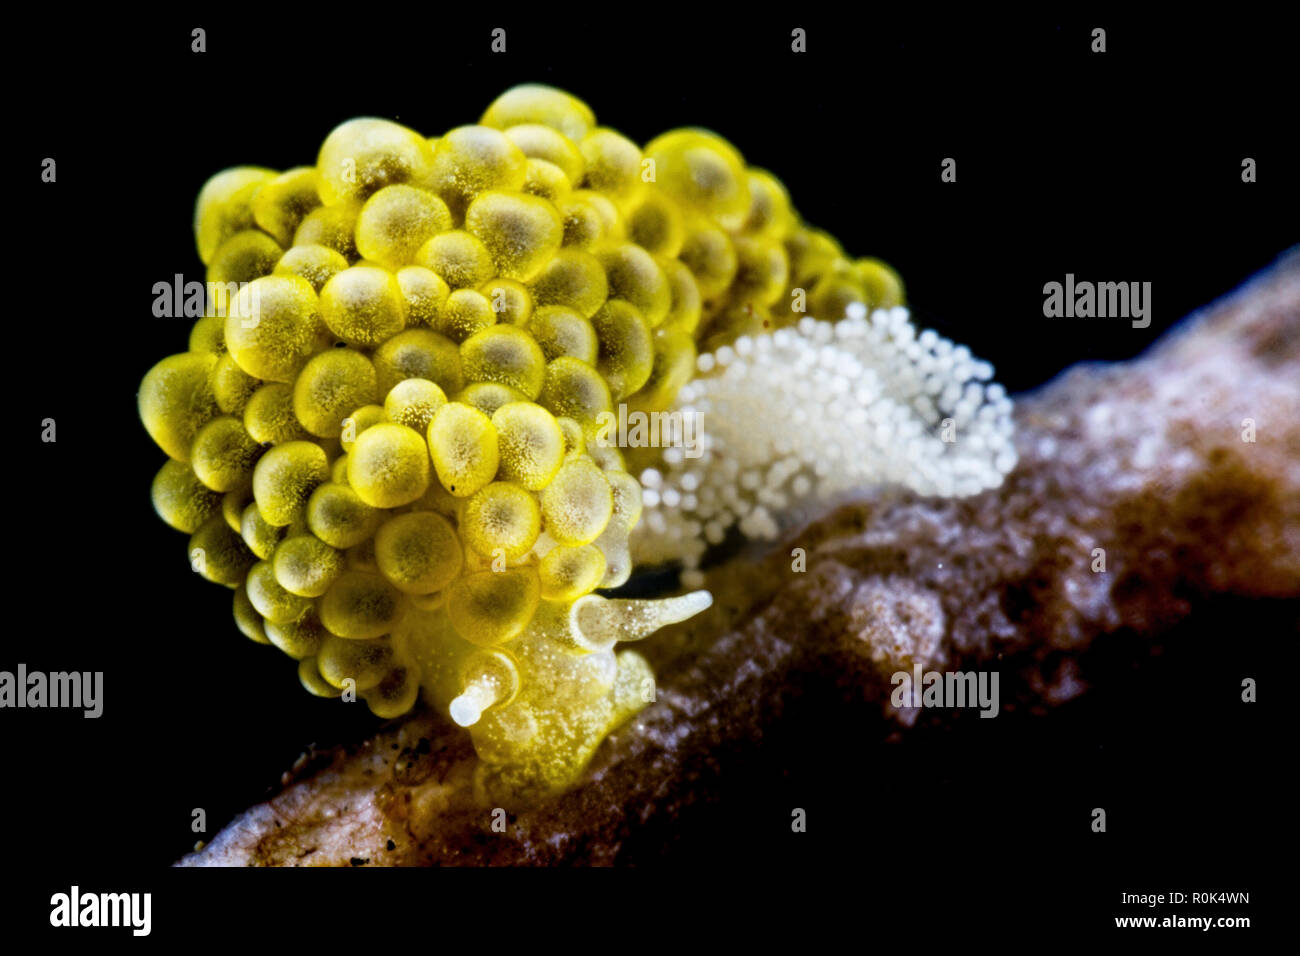 Doto ussi nudibranch watching over its eggs, Lembeh Strait, Indonesia. Stock Photo